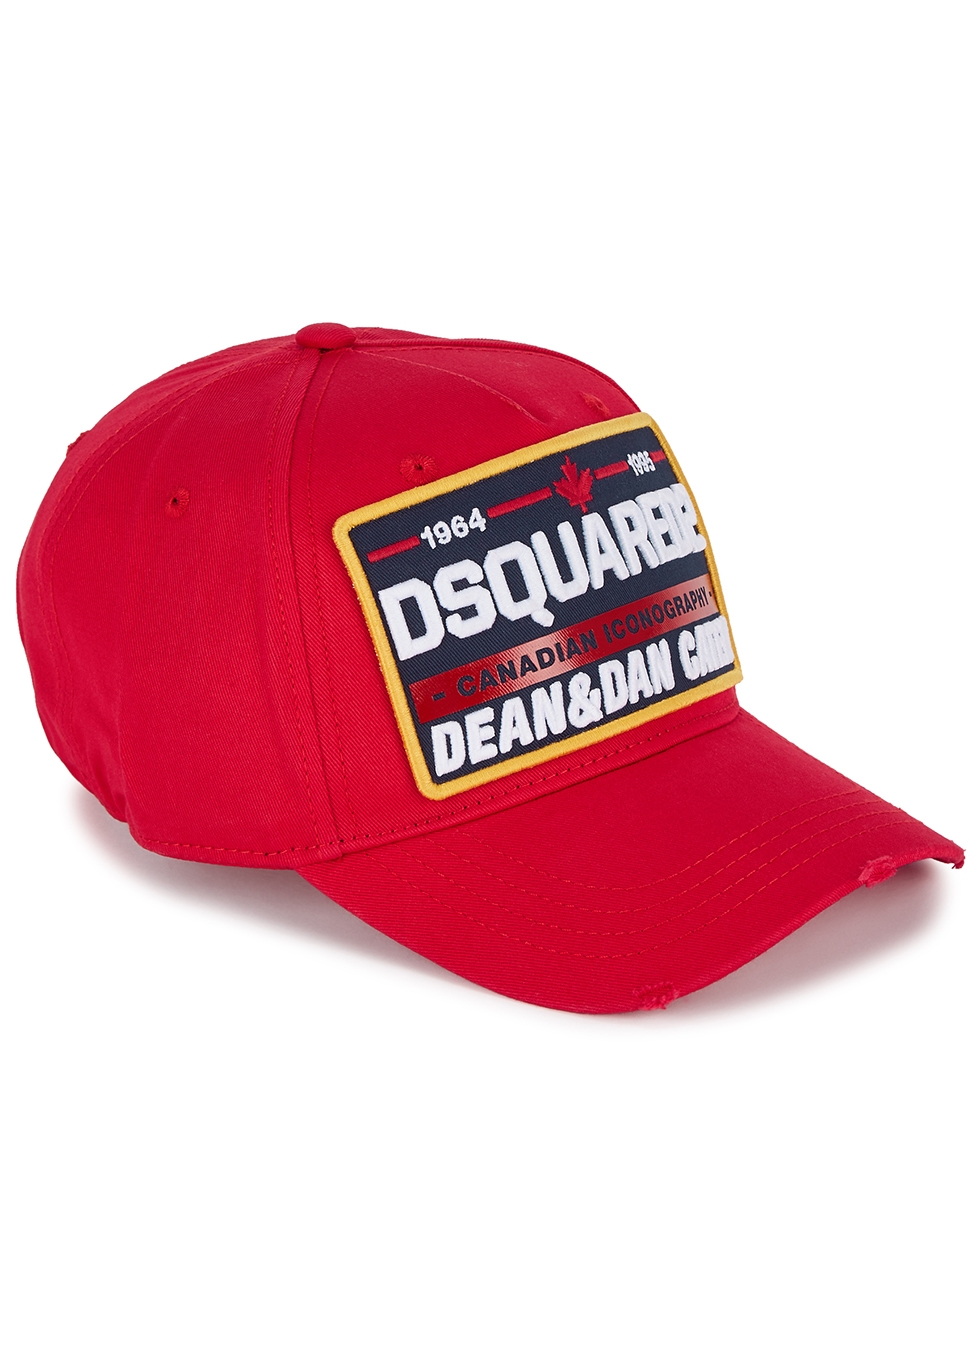 dsquared red hat